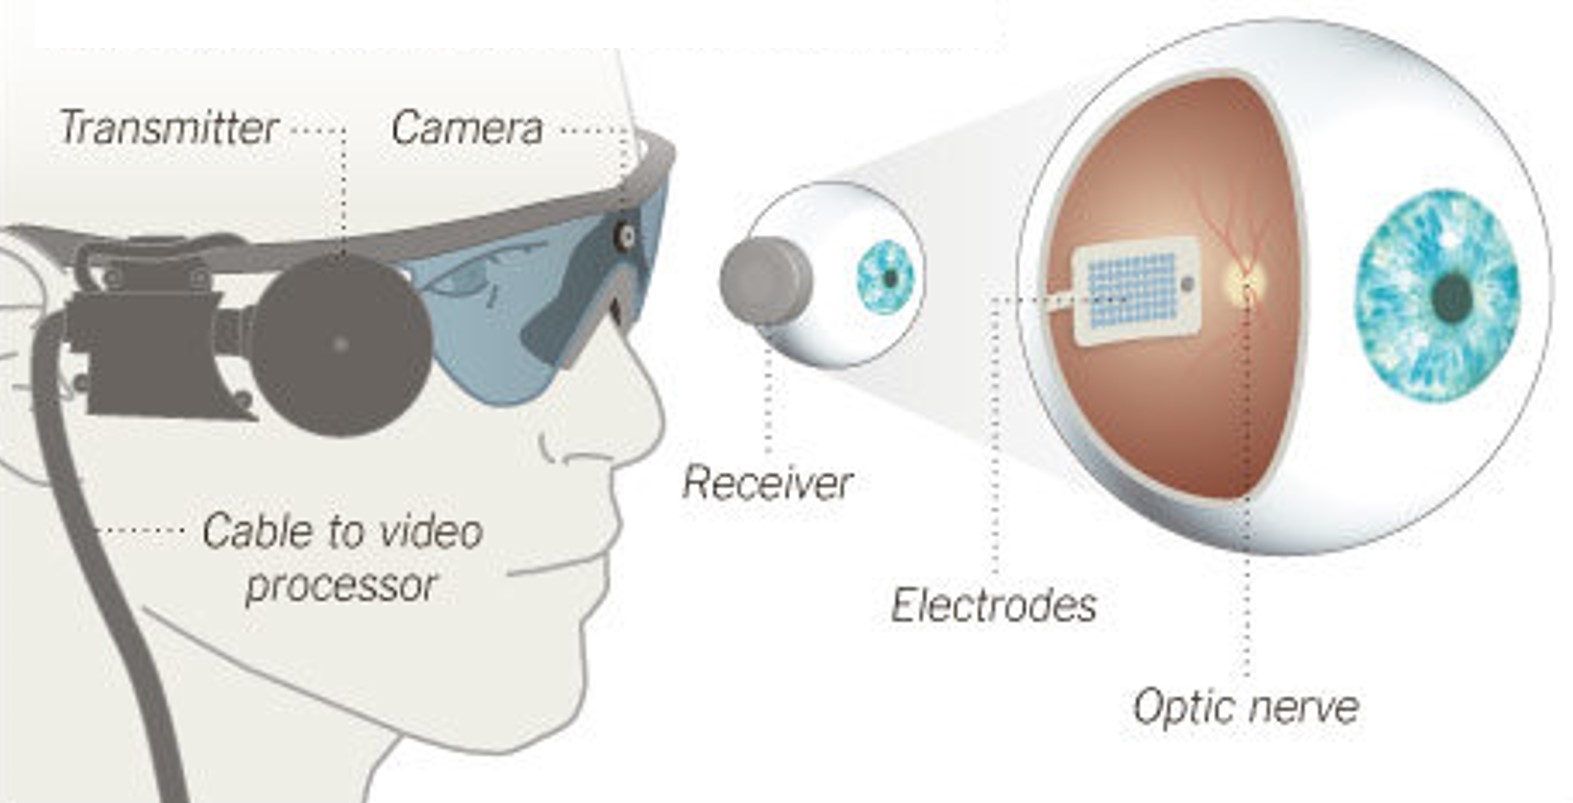 Argus II Retinal Prosthesis System (Source: Second Sight). Camera images are processed and transferred to electrodes implanted in the back of the eye